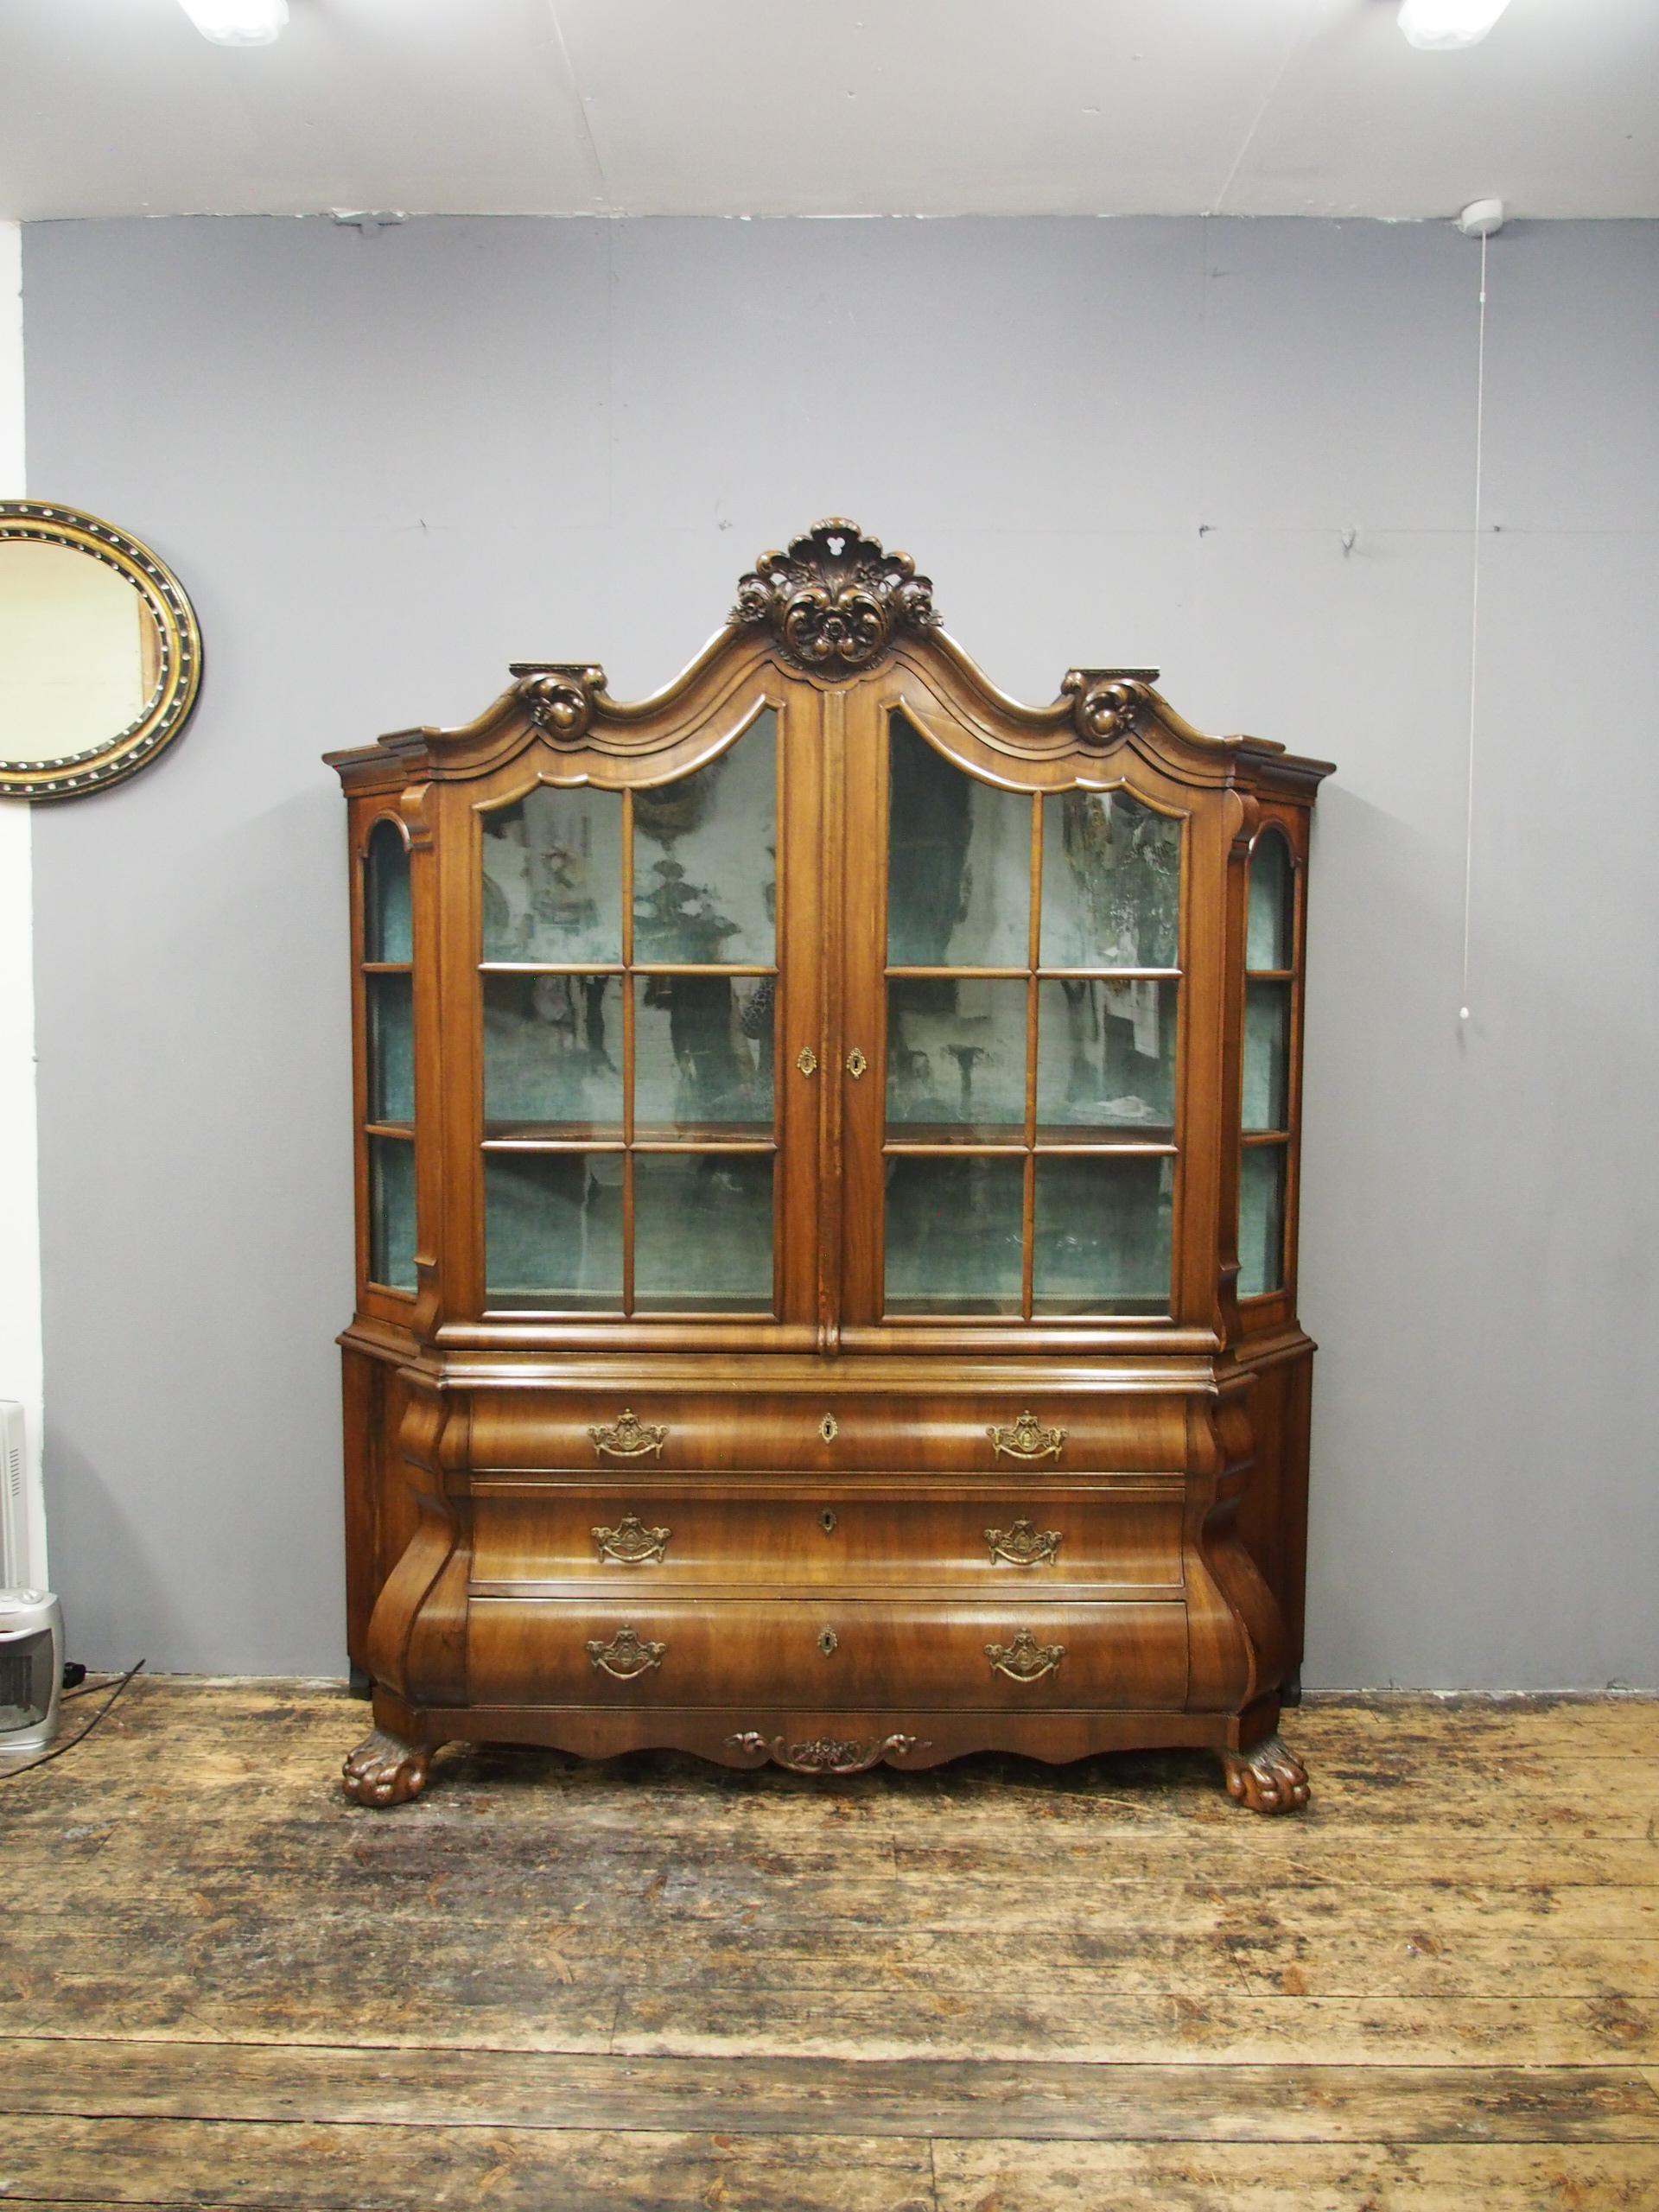 Victorian Dutch walnut display cabinet or bookcase, circa 1850. The shaped domed top has a moulded cornice and is surmounted by a pierced and carved foliate cartouche. The twin astragal glazed doors open to an interior with a velvet lined back and